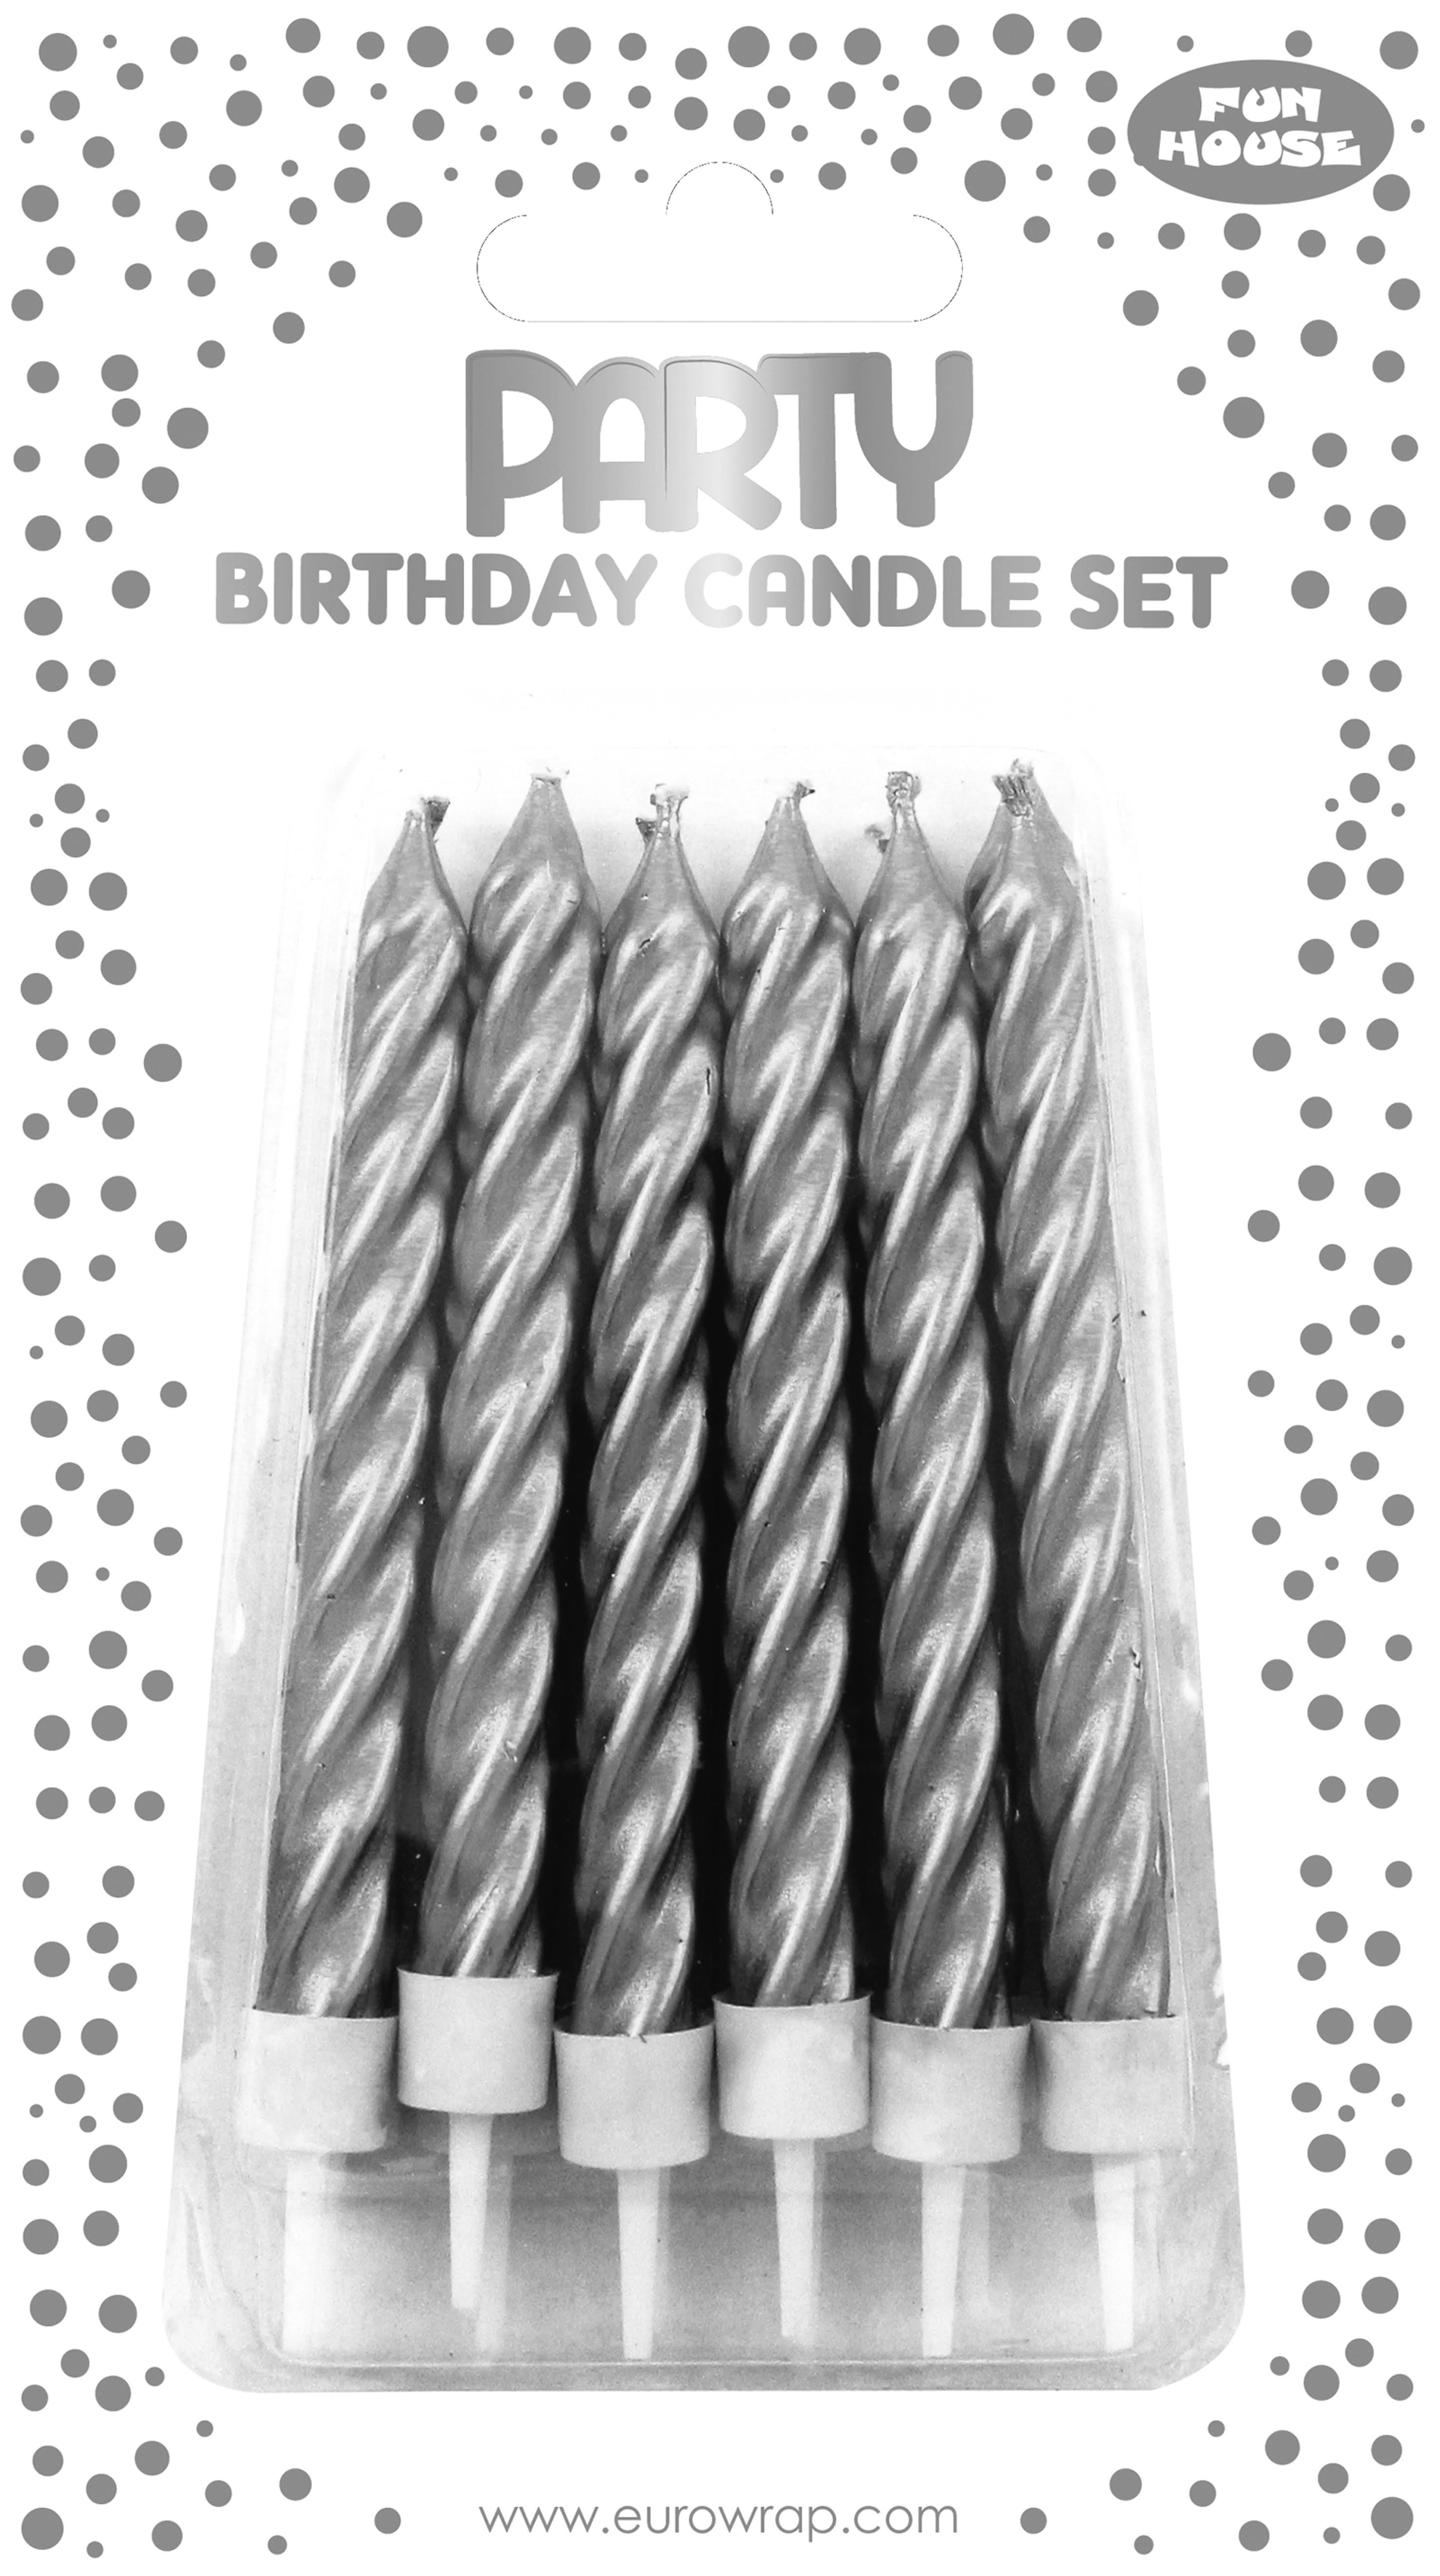 Eurowrap Party Birthday Candle Set - Silver, 5 Candles